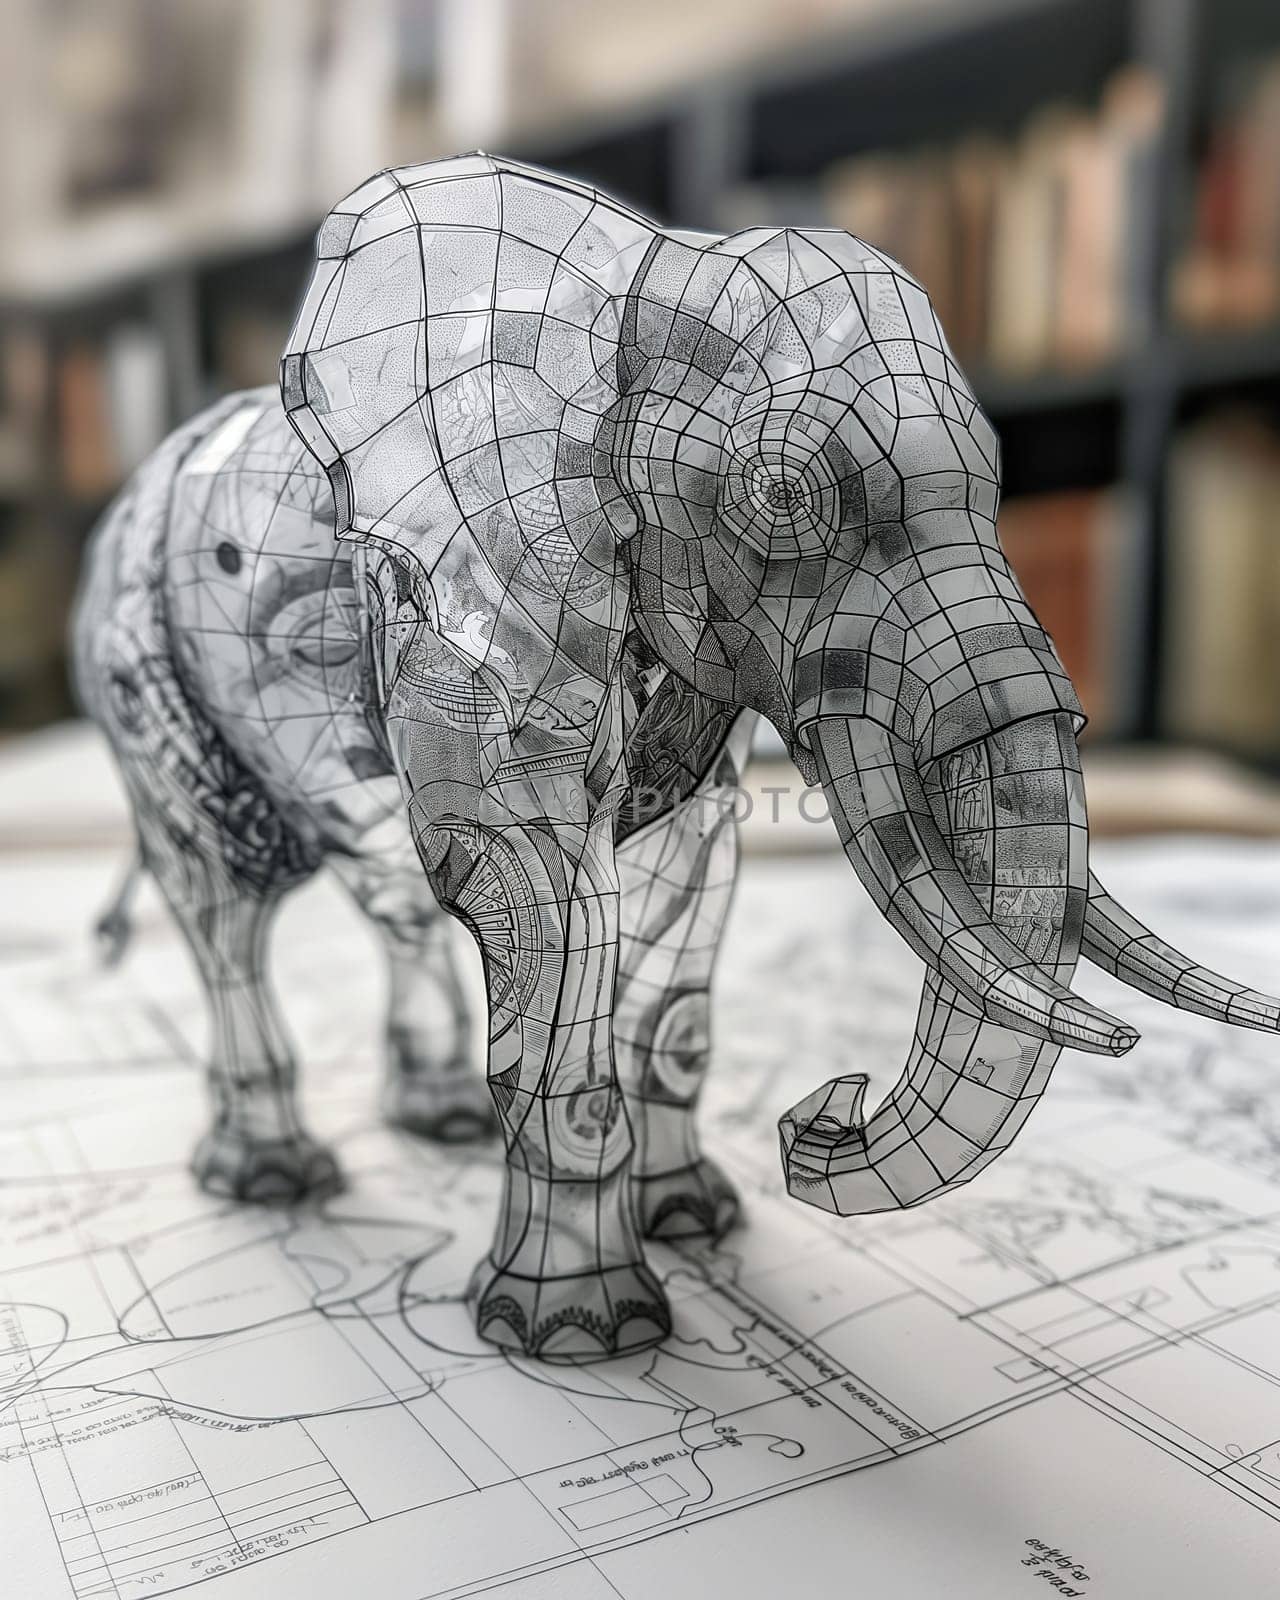 Wireframe Elephant Design in Modern Office. Selective focus.